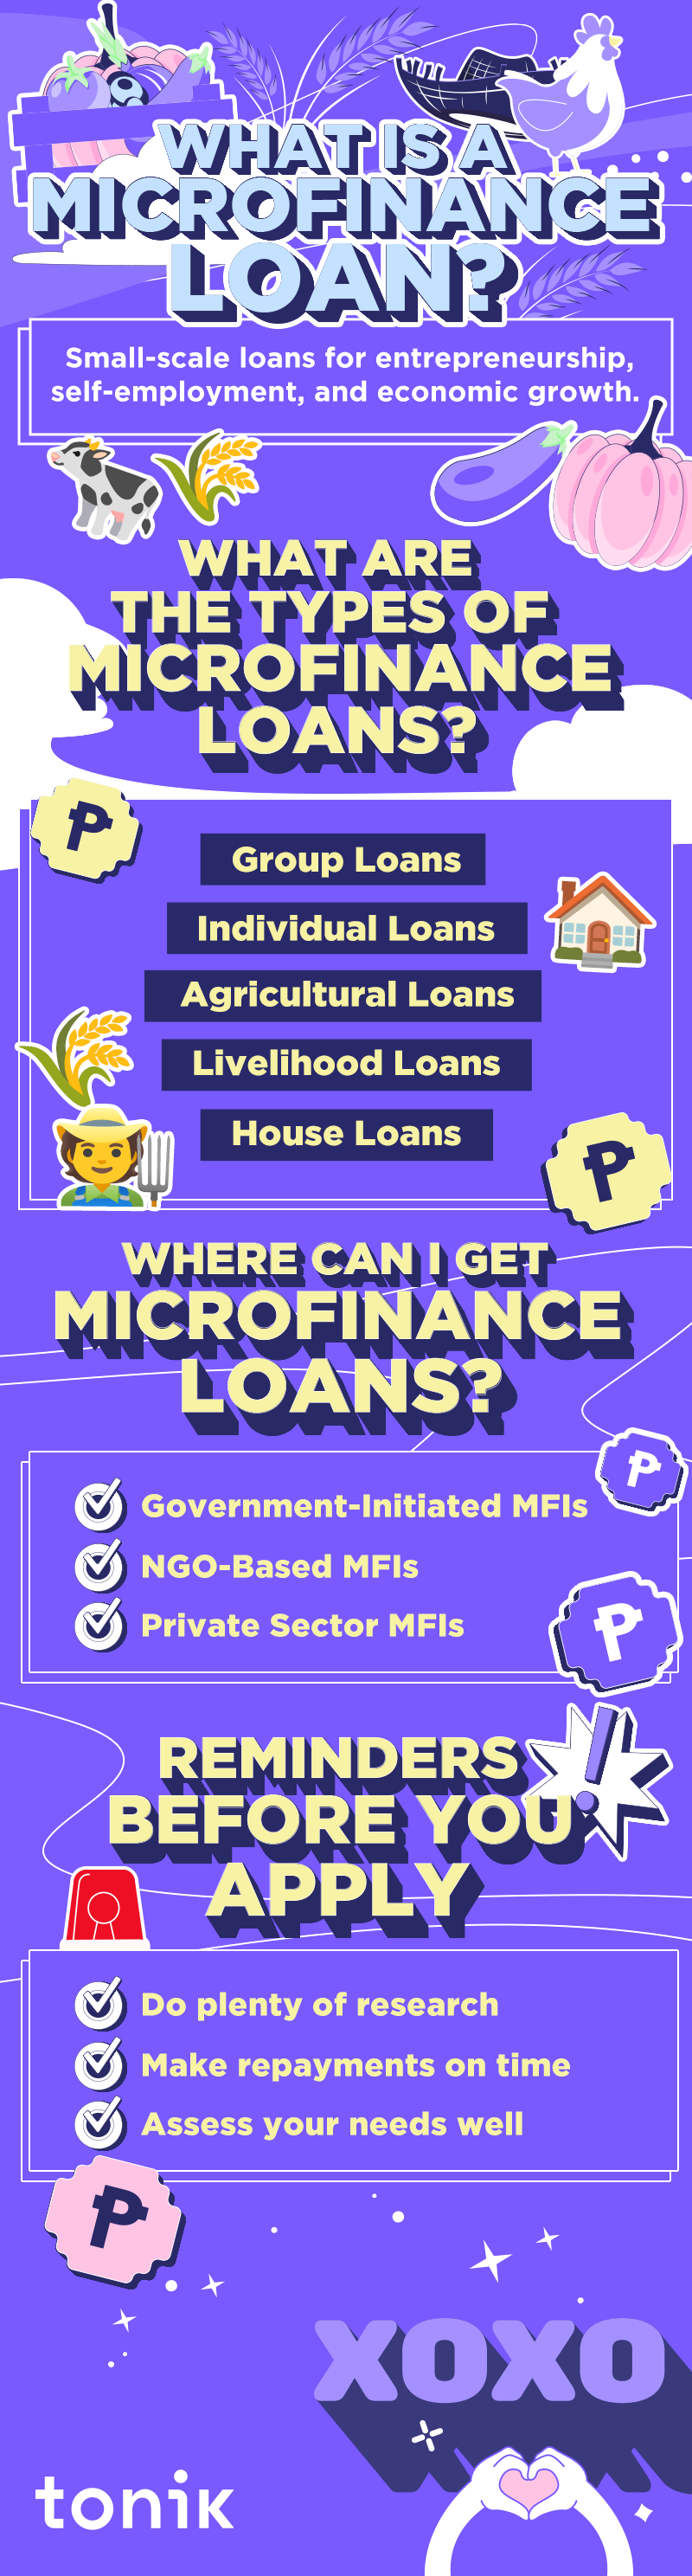 infographic on microfinance loans